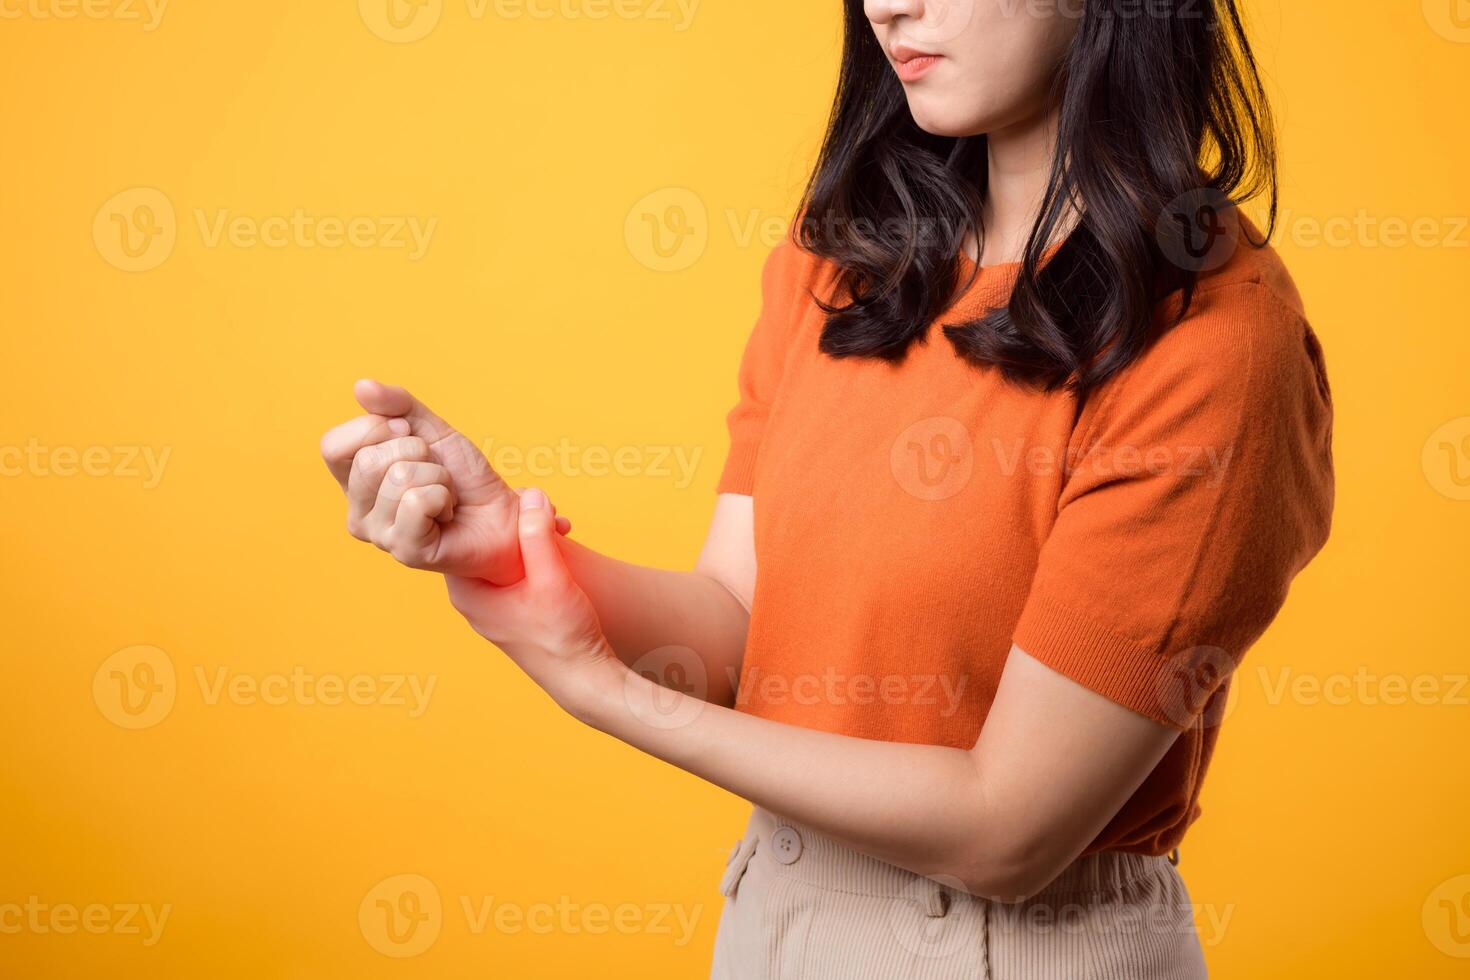 Young Asian woman in her 30s with wrist injury. holding her wrist and looking pained against yellow background. close-up perspective. wrist injuries, pain, inflammation, and medical care concept. photo